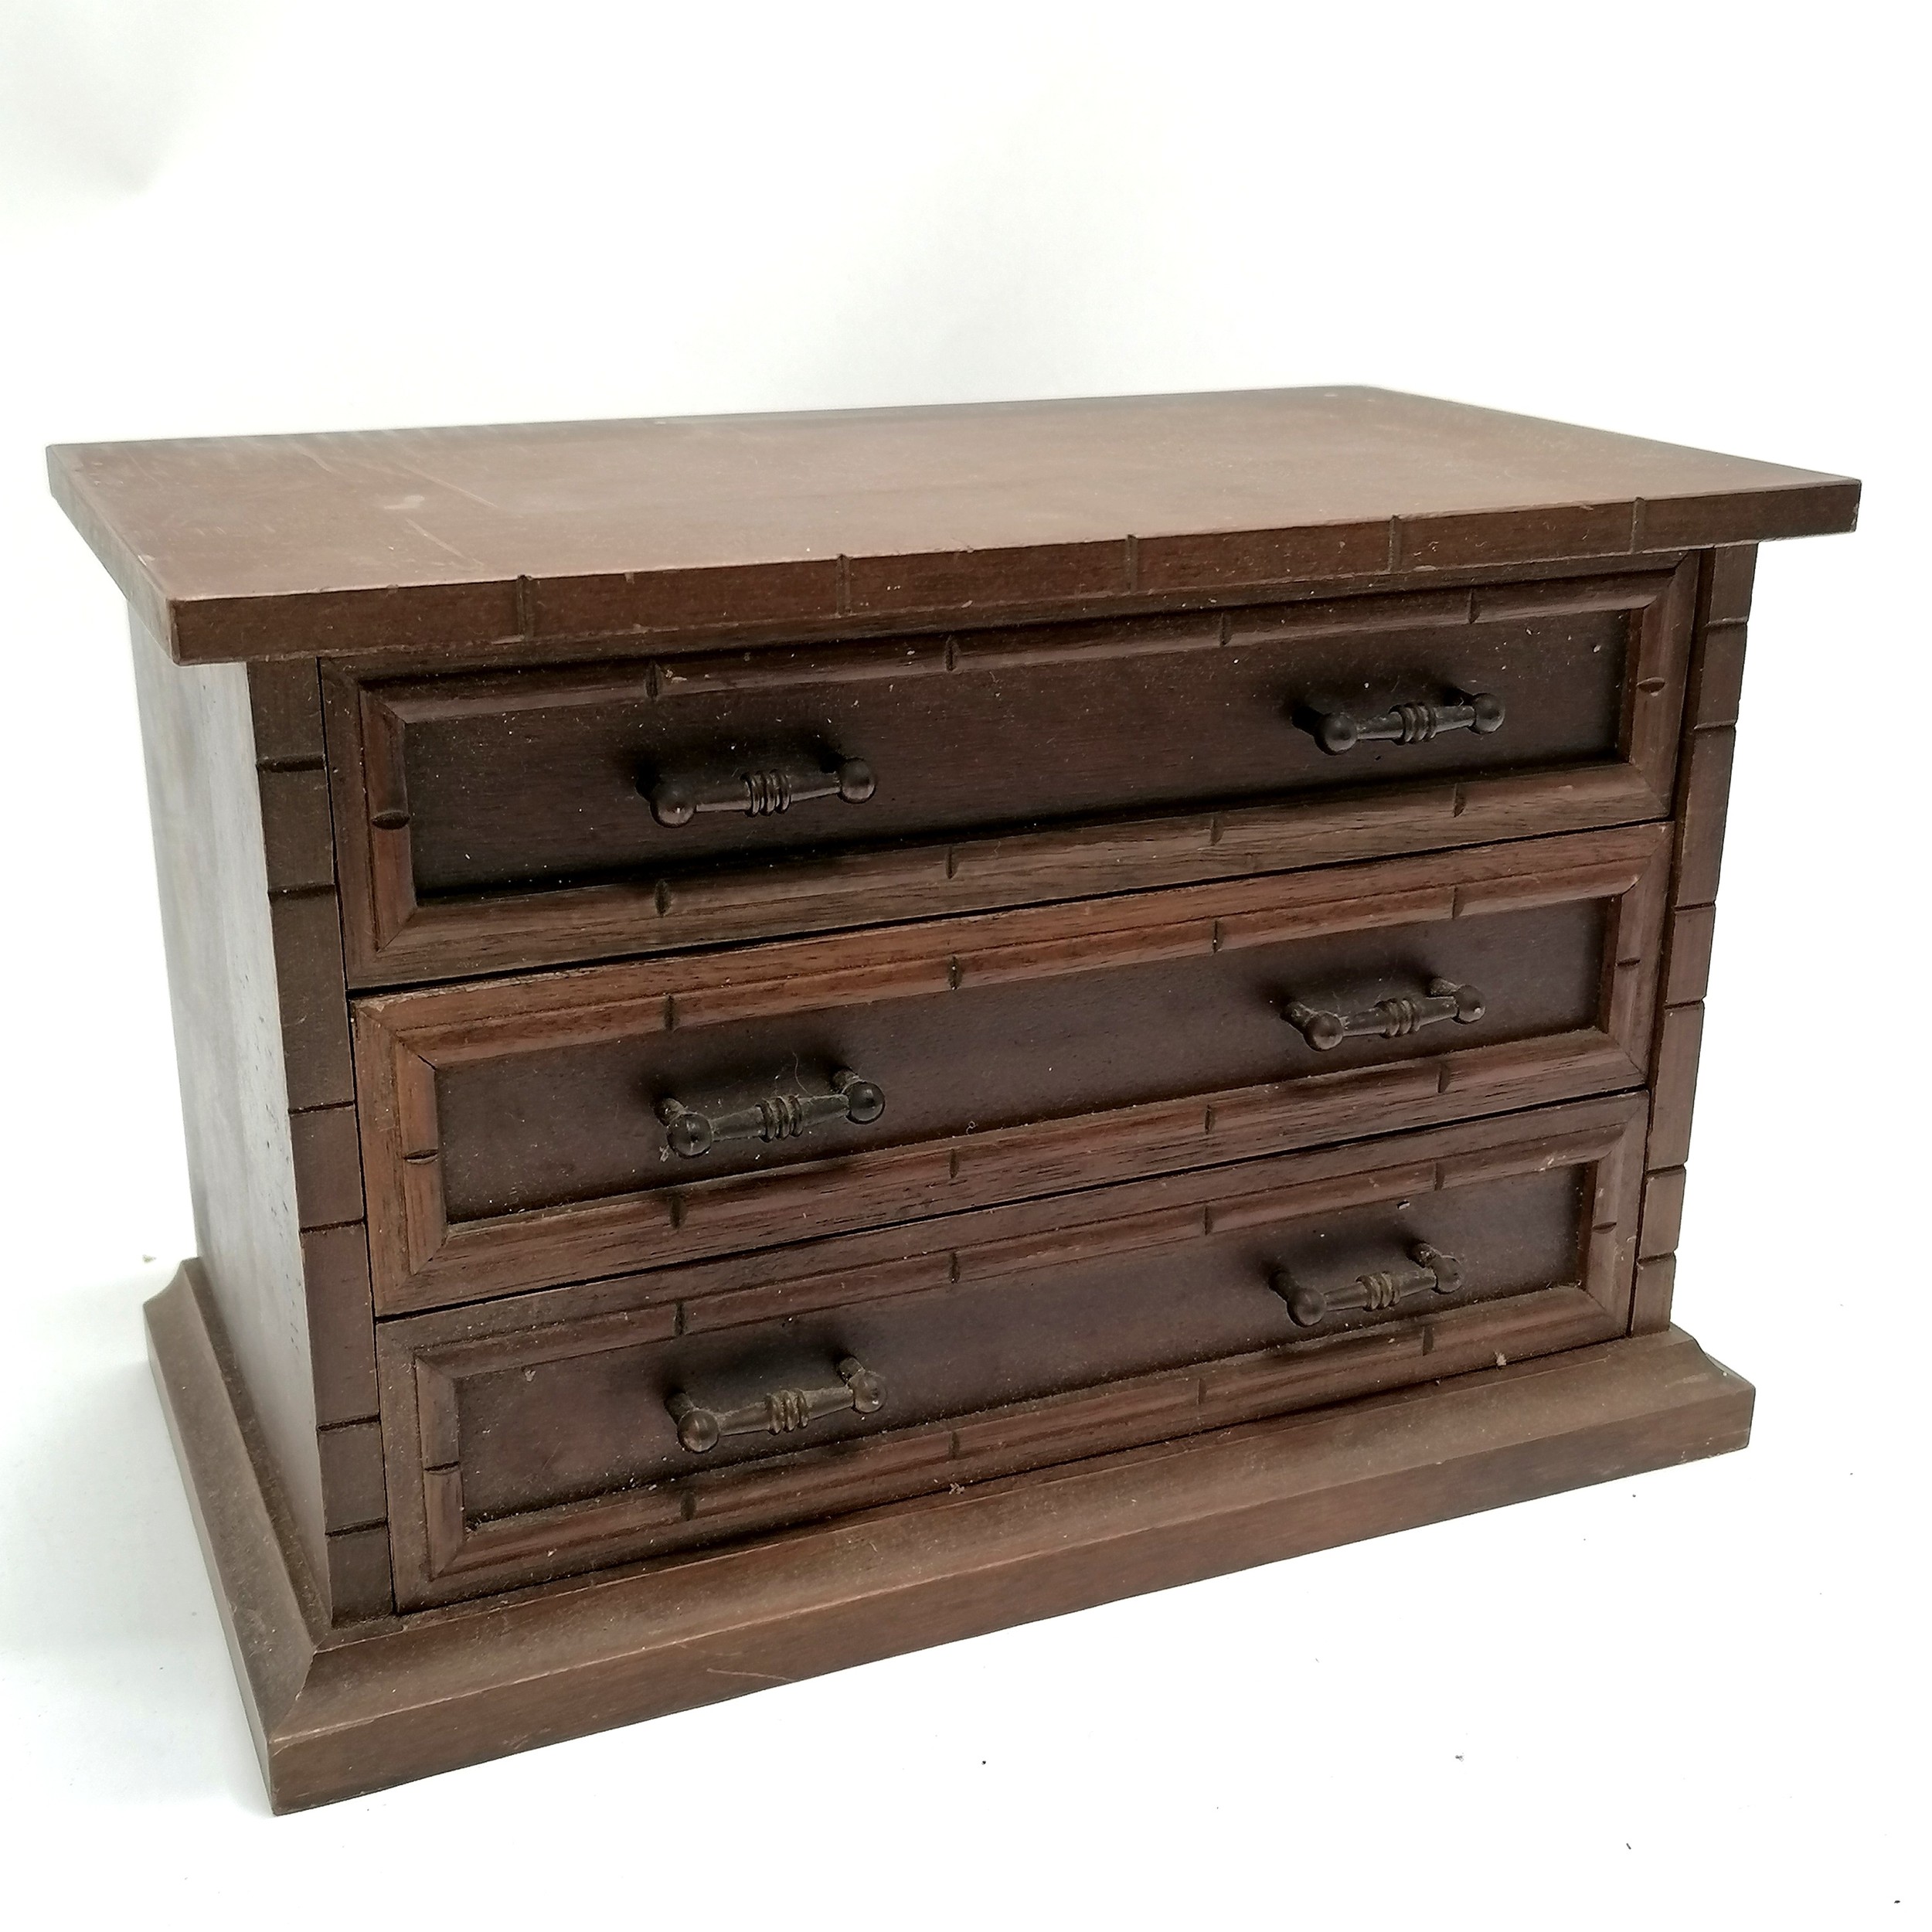 Mahogany 3 drawer jewellery cabinet with fabric lined drawers 29cm x 17cm x 19cm high - no obvious - Image 3 of 3